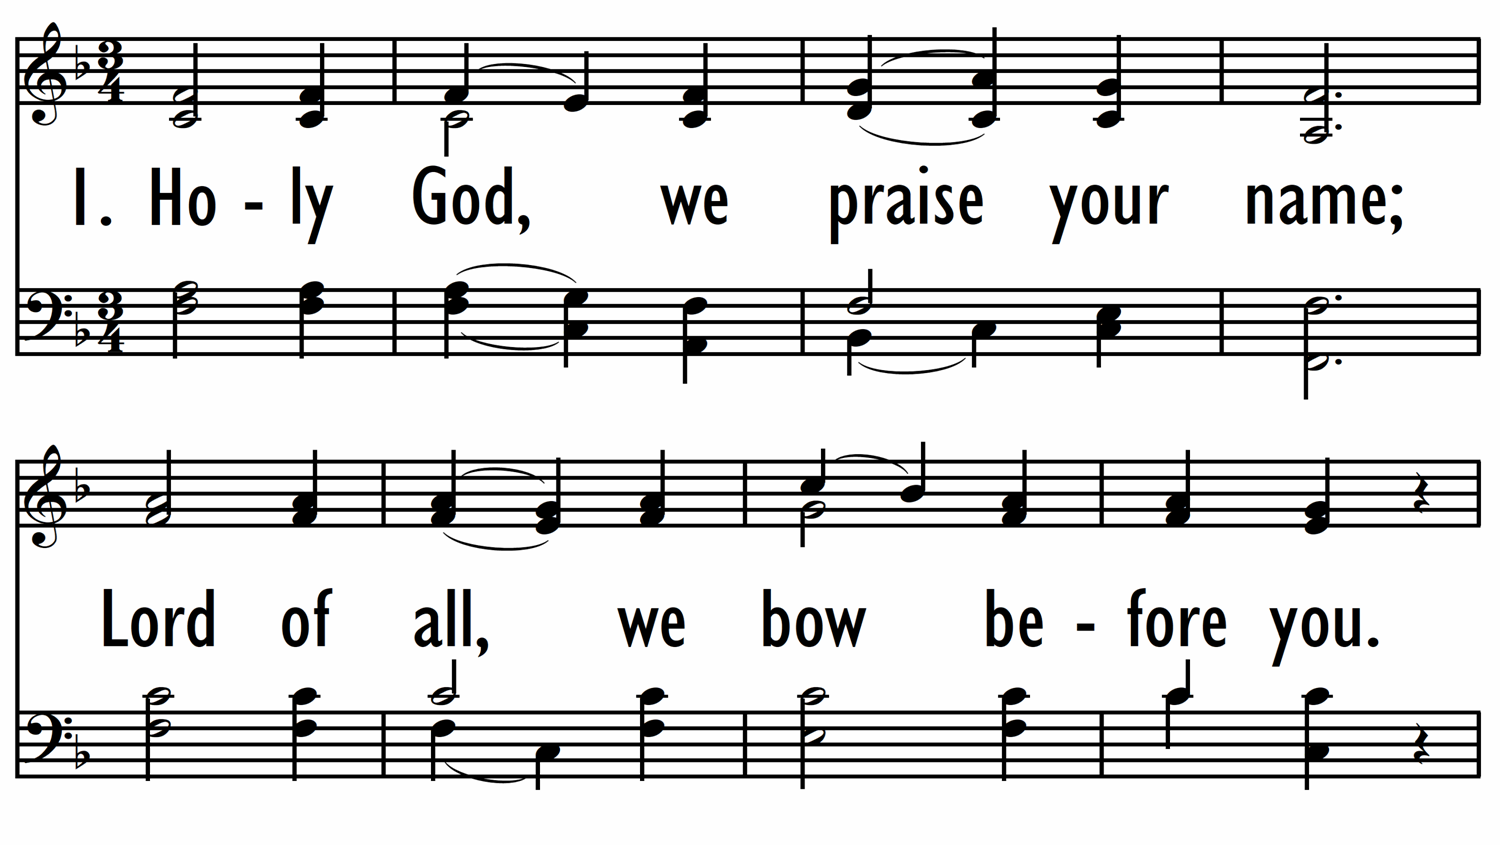 HOLY GOD, WE PRAISE YOUR NAME-ppt